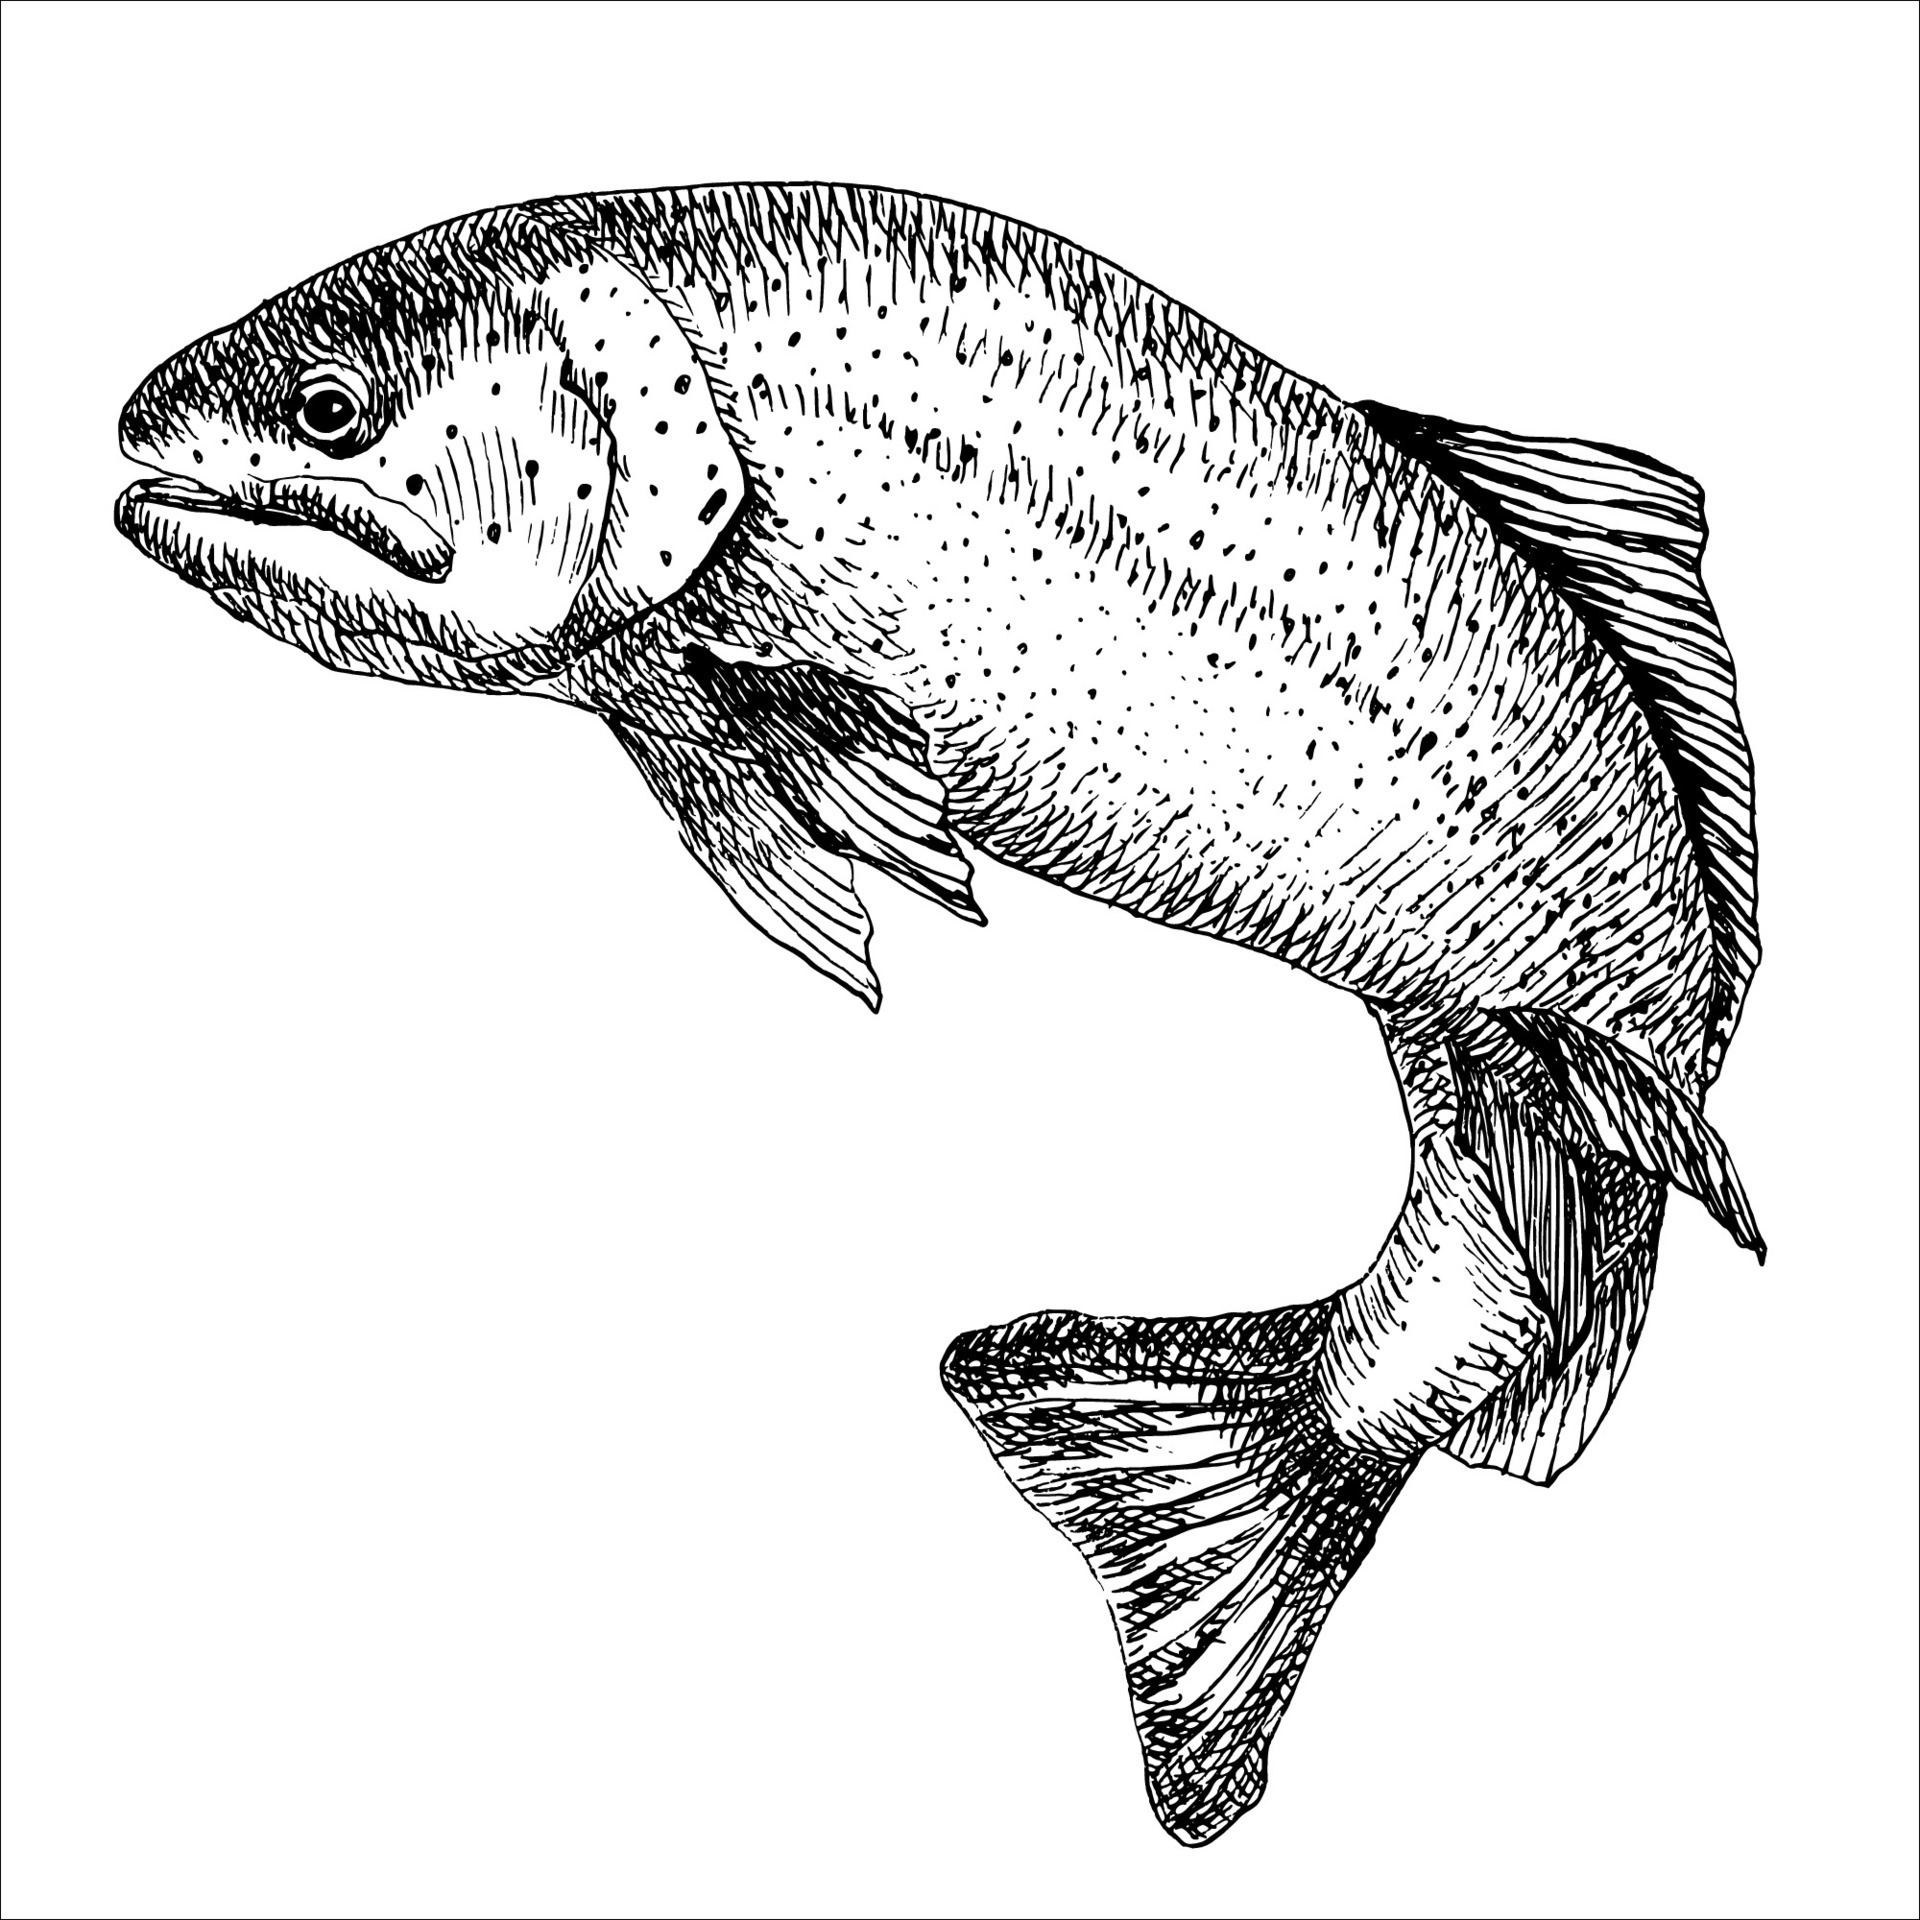 Trout fish in hand drawn strokes. Realistic drawing of the rainbow